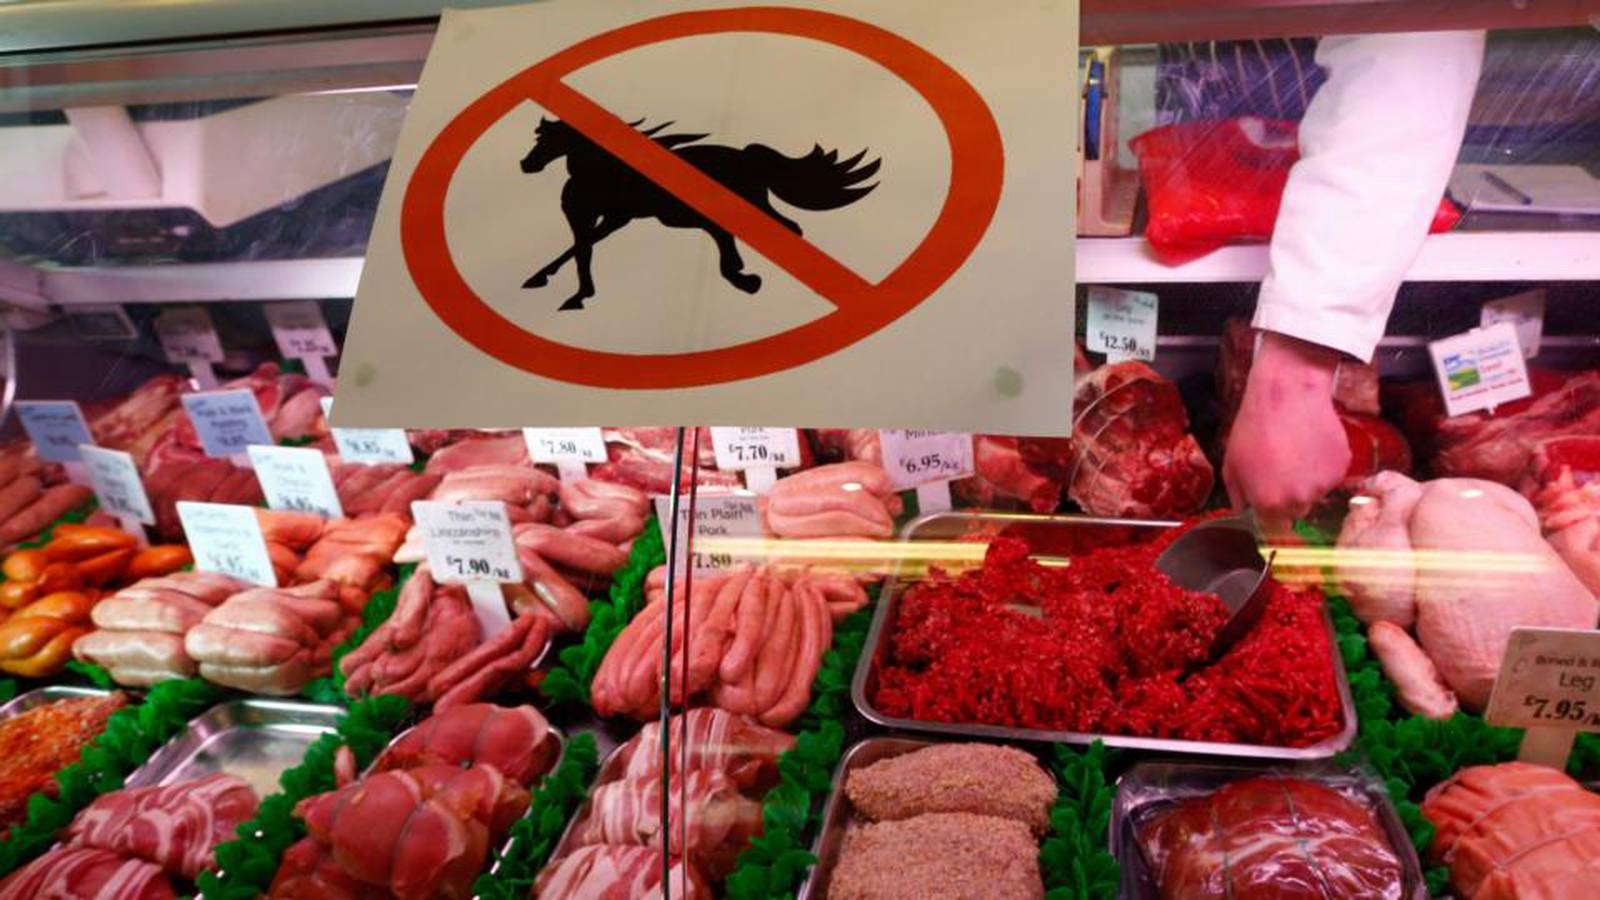 Annoyance that ‘the Paddies’ uncovered horse meat scandal, conference